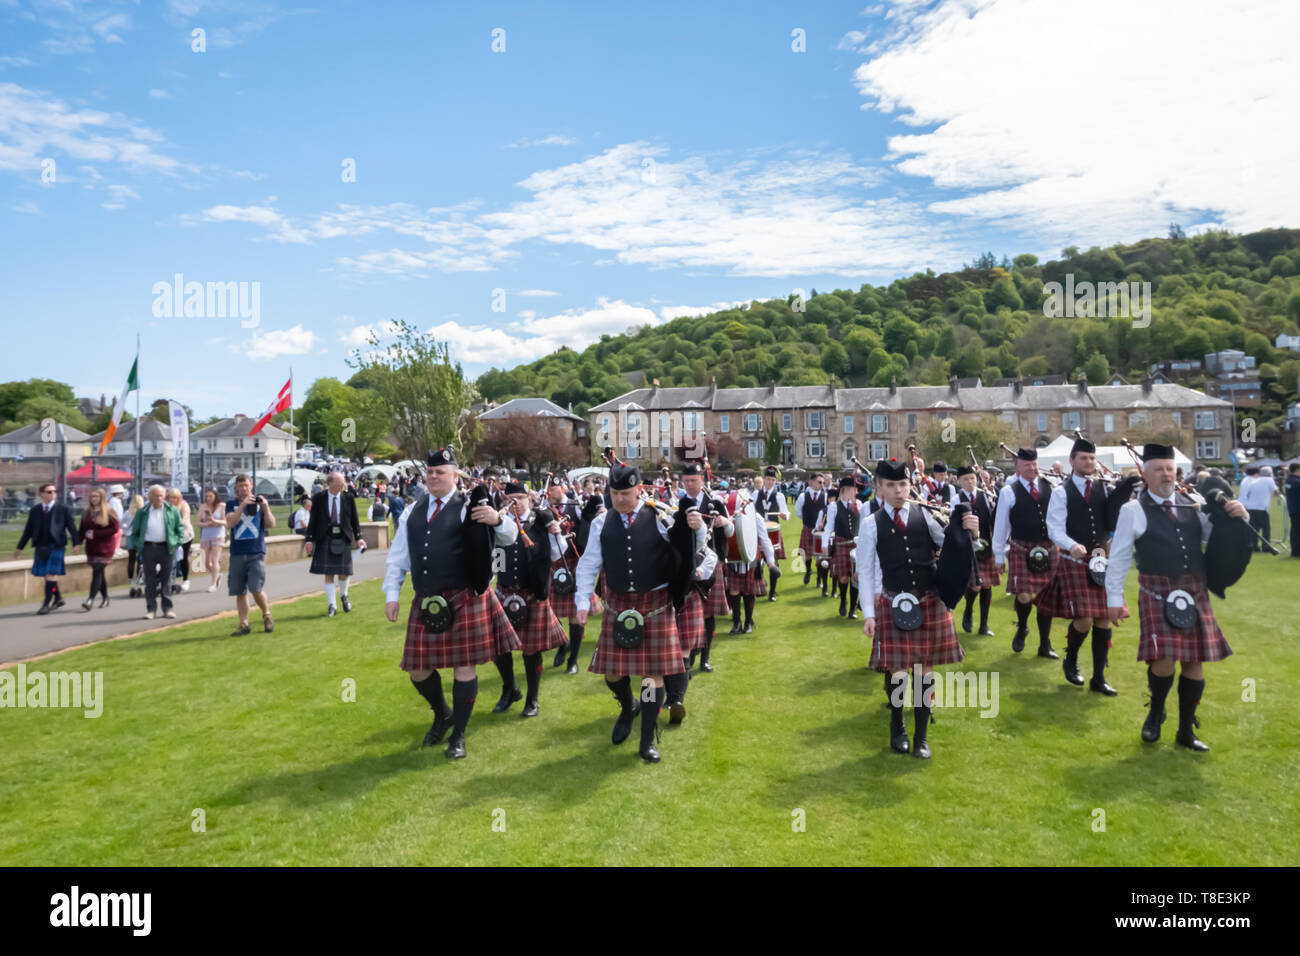 Greenock, Scotland, UK. 12th May, 2019. A pipe band enters the competition arena at the 63rd annual Gourock Highland Games which celebrates traditional Scottish culture with pipe band competitions, highland dancing, traditional highland games and is held in the picturesque setting of Battery Park.  Credit: Skully/Alamy Live News Stock Photo